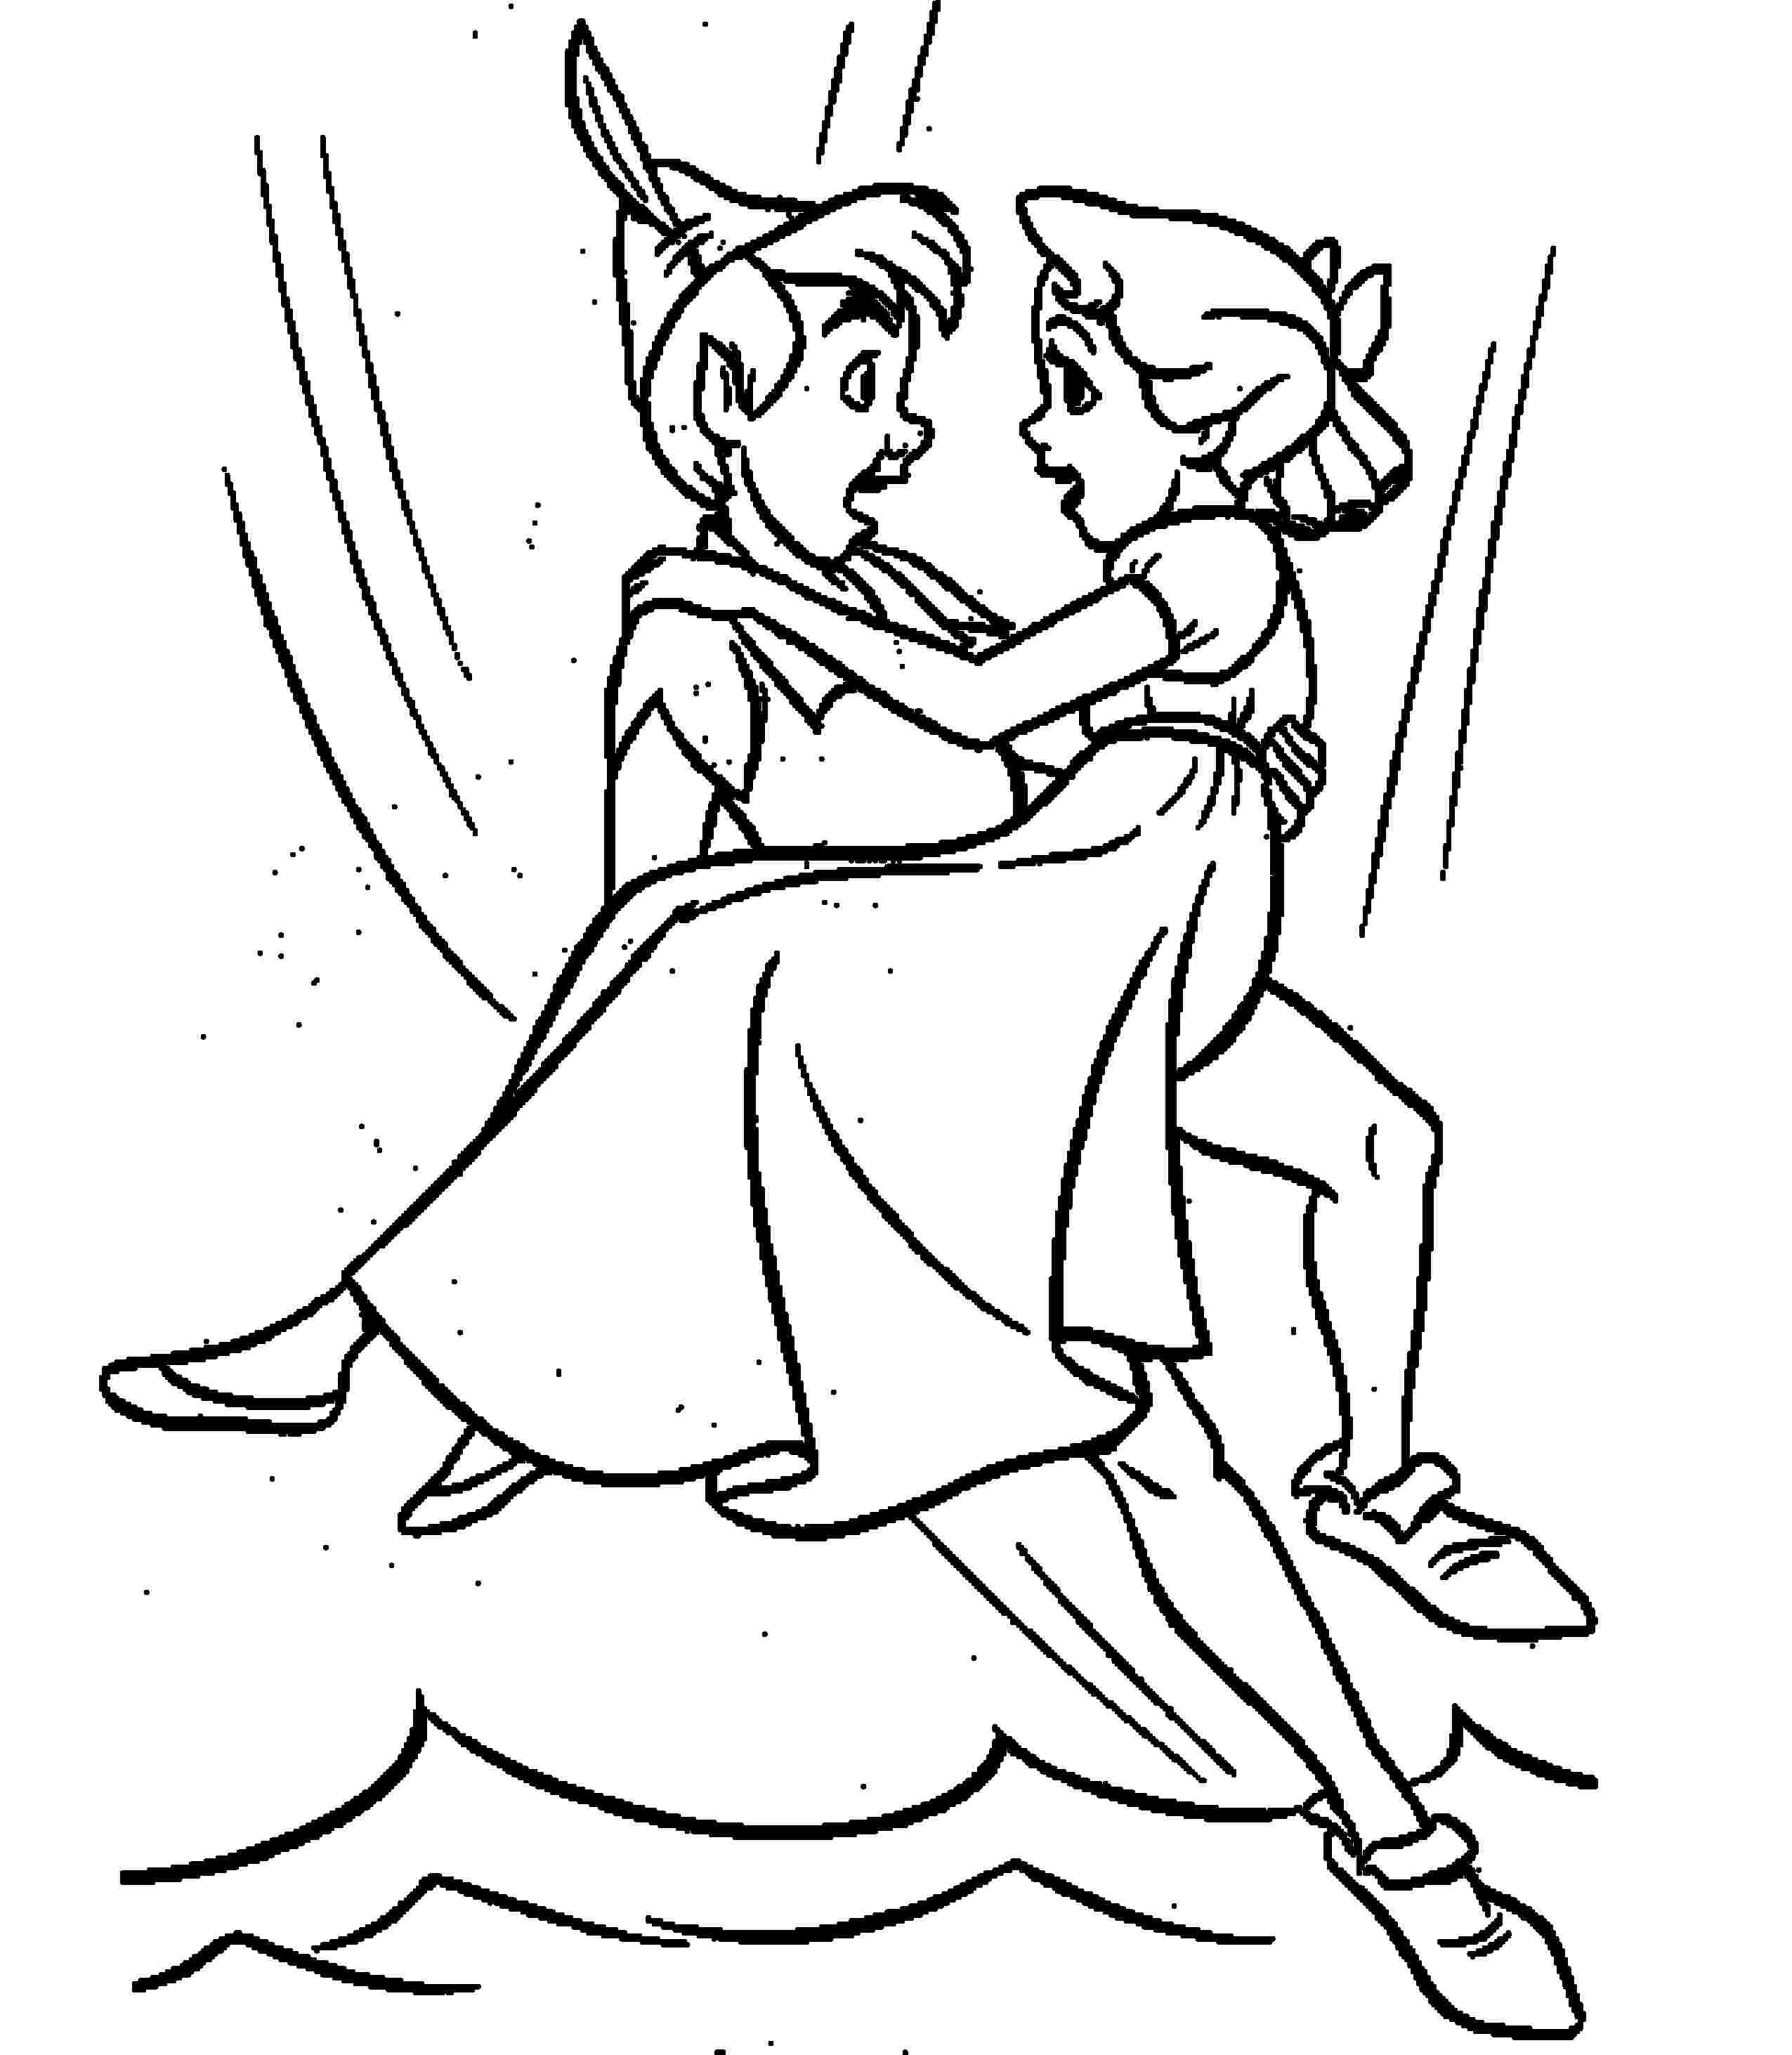 Peter Pan And Tinkerbell Coloring Pages at GetColorings.com | Free ...